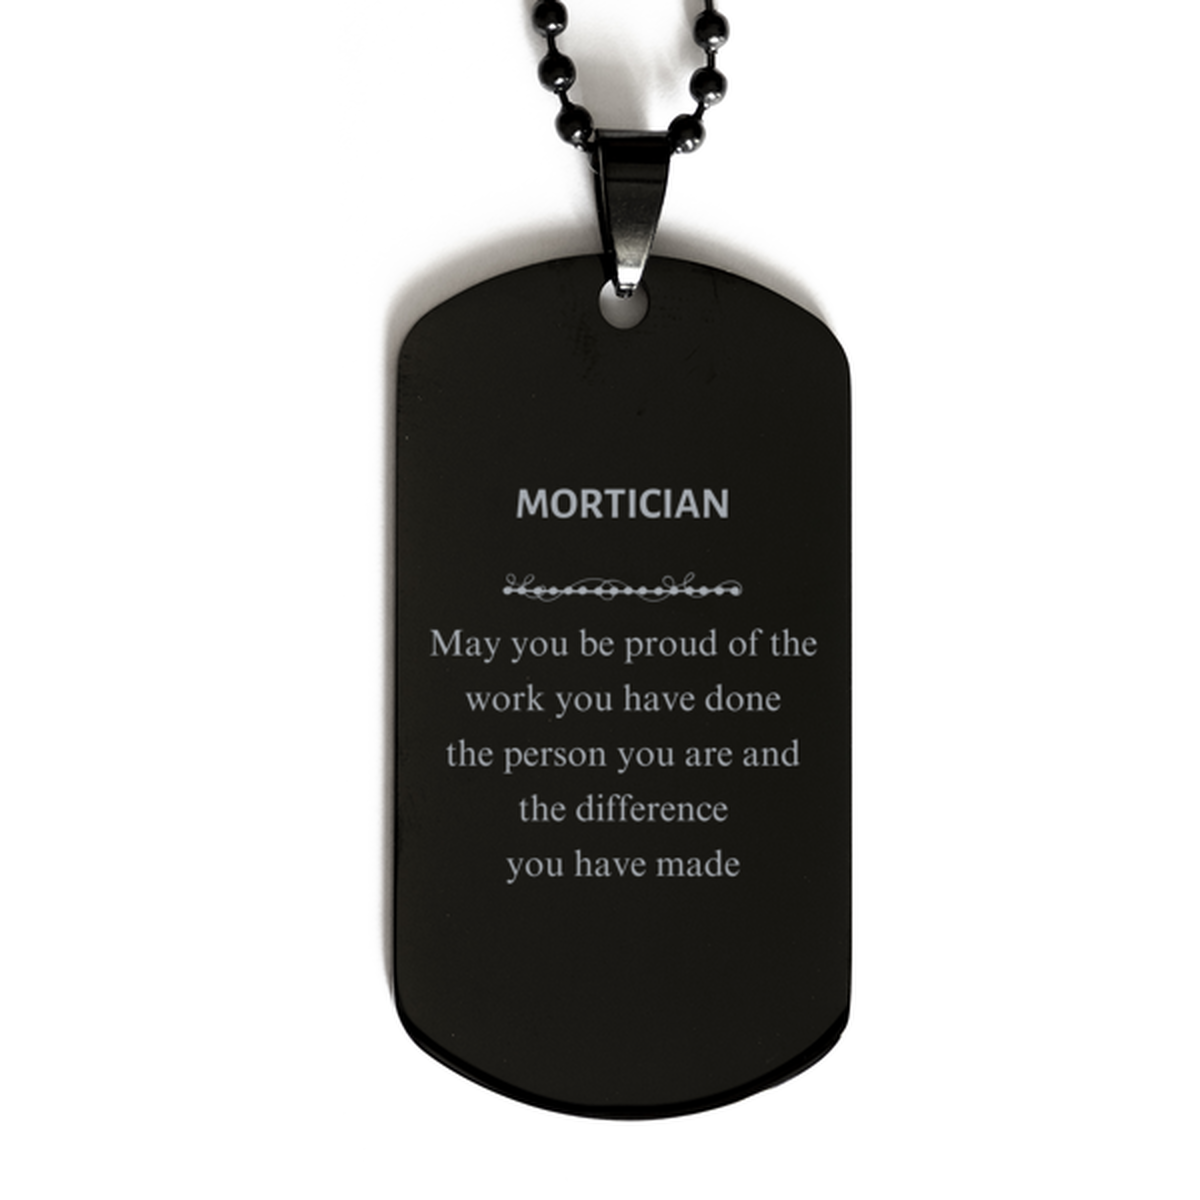 Mortician May you be proud of the work you have done, Retirement Mortician Black Dog Tag for Colleague Appreciation Gifts Amazing for Mortician